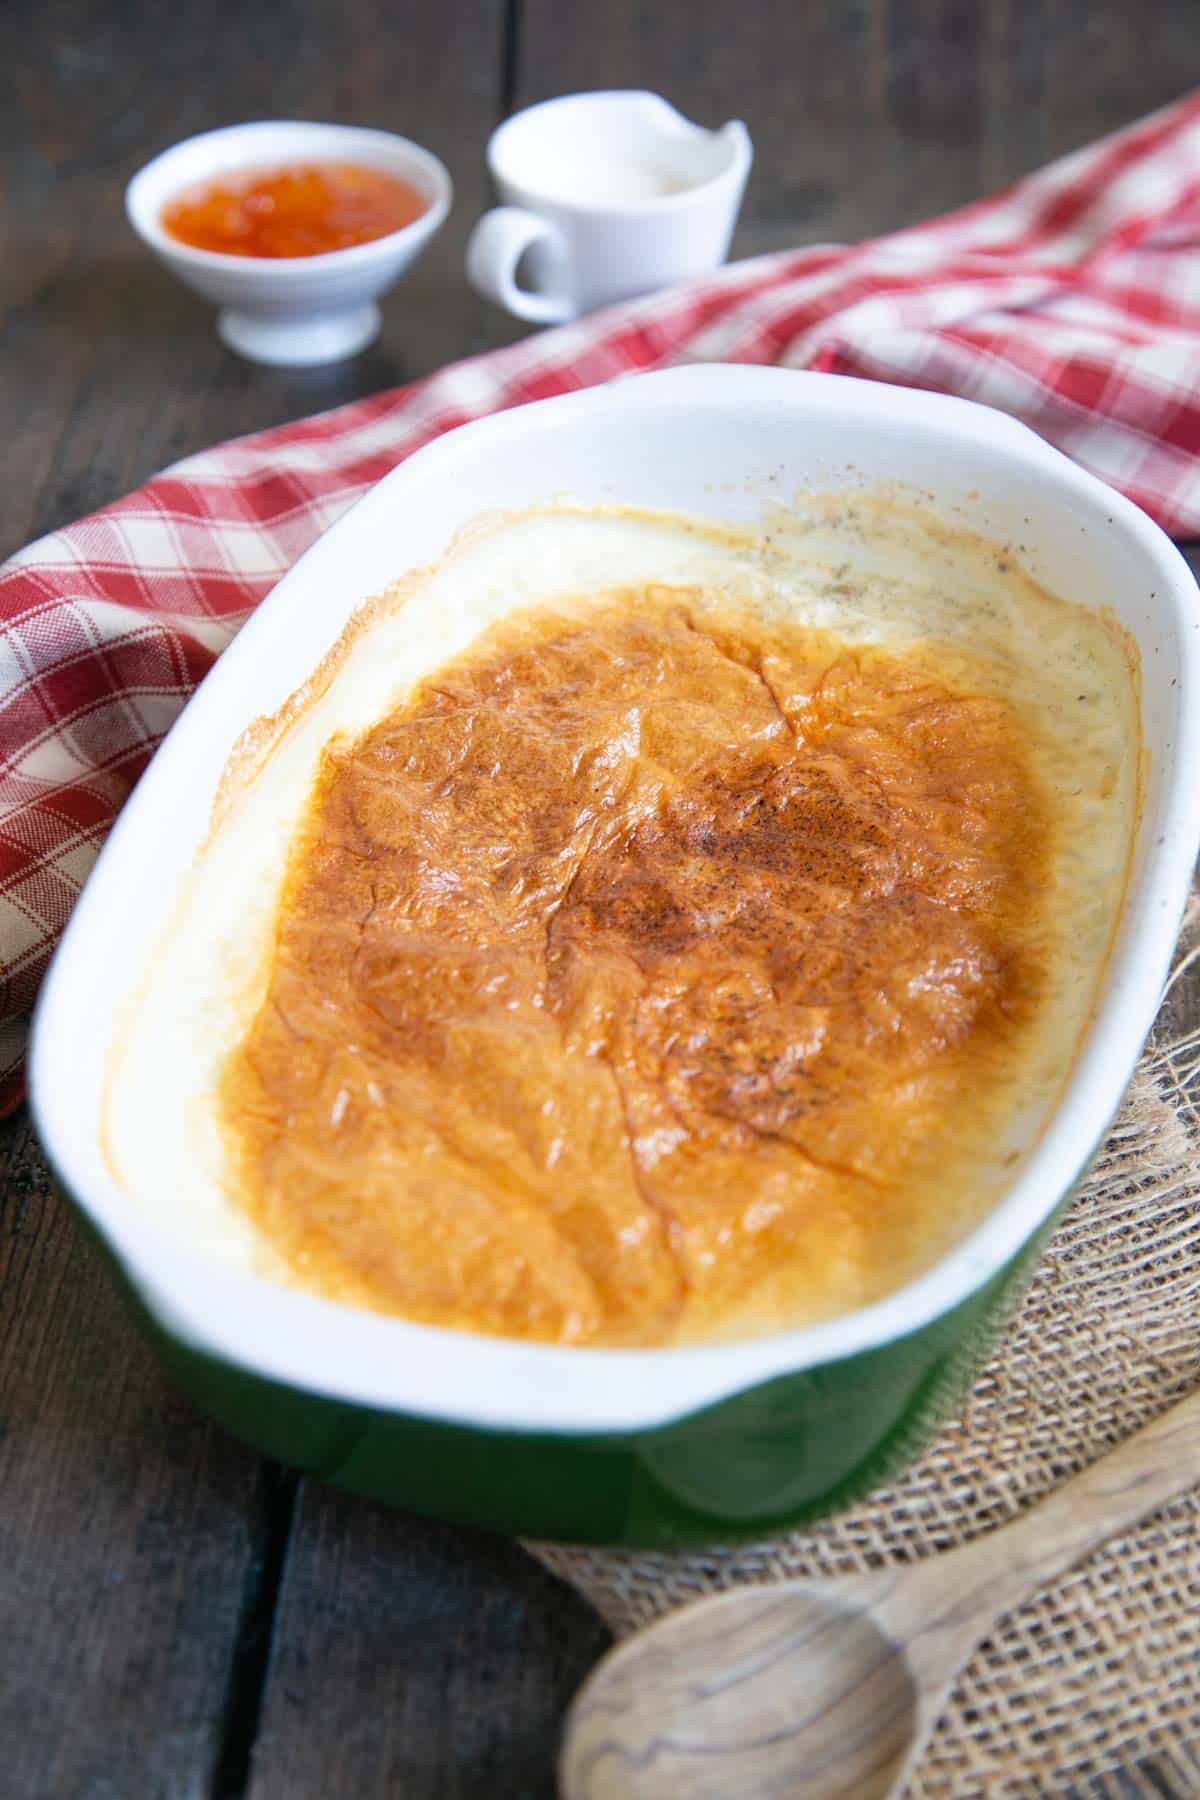 A dish of baked rice pudding ready to serve, showing the delicious brown crust.